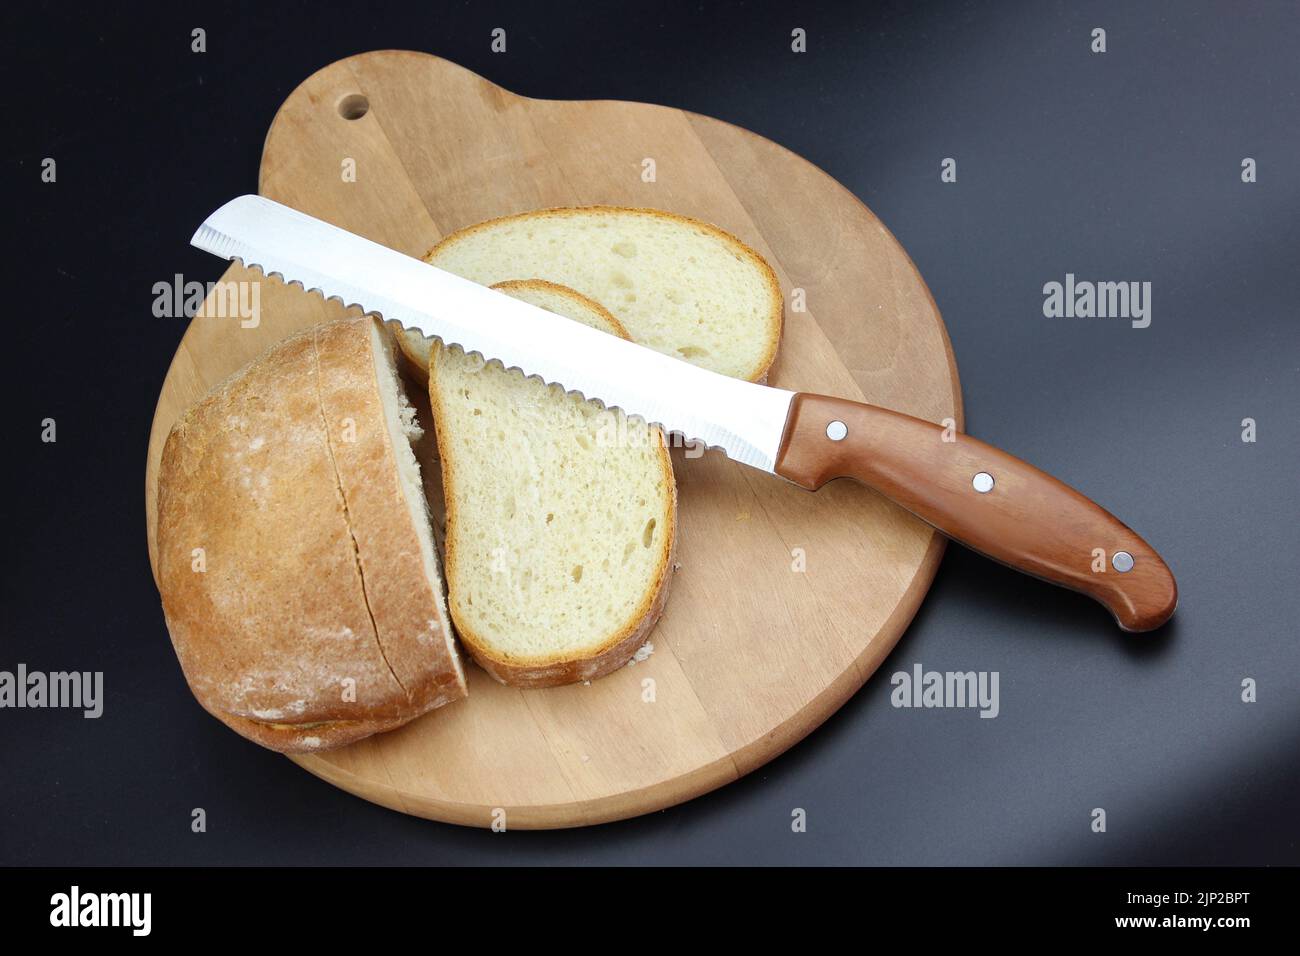 Knife is cutting a loaf of bread into slices. Seed bread, homemade bread,cutting bread Stock Photo